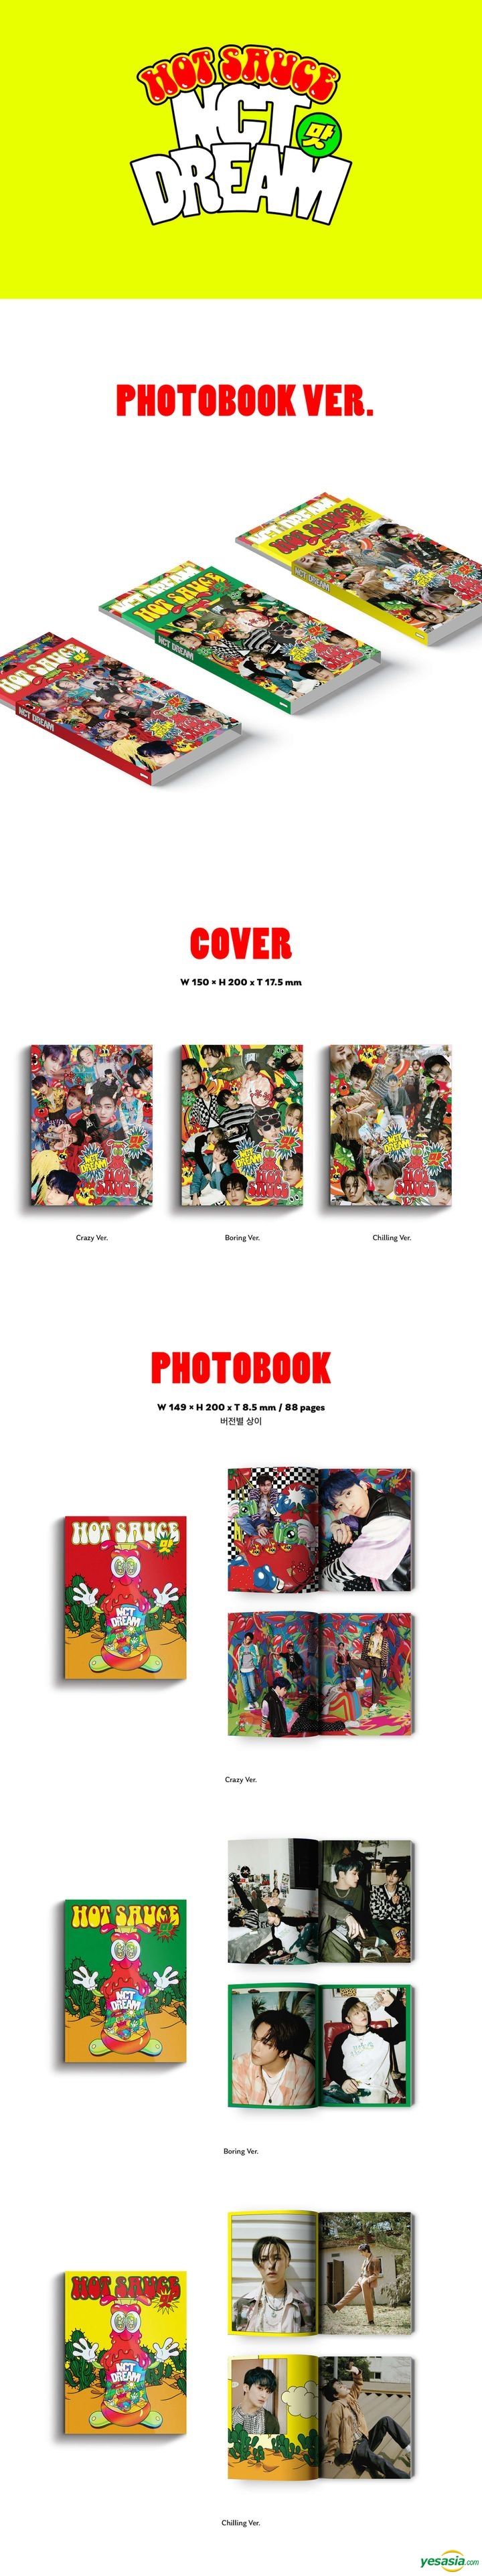 NCT Dream The 1st Album Photobook Chilling ver. Photocards Pre Order CD+Photobook+Folded Poster+Others with Tracking Extra Decorative Stickers Hot Sauce 